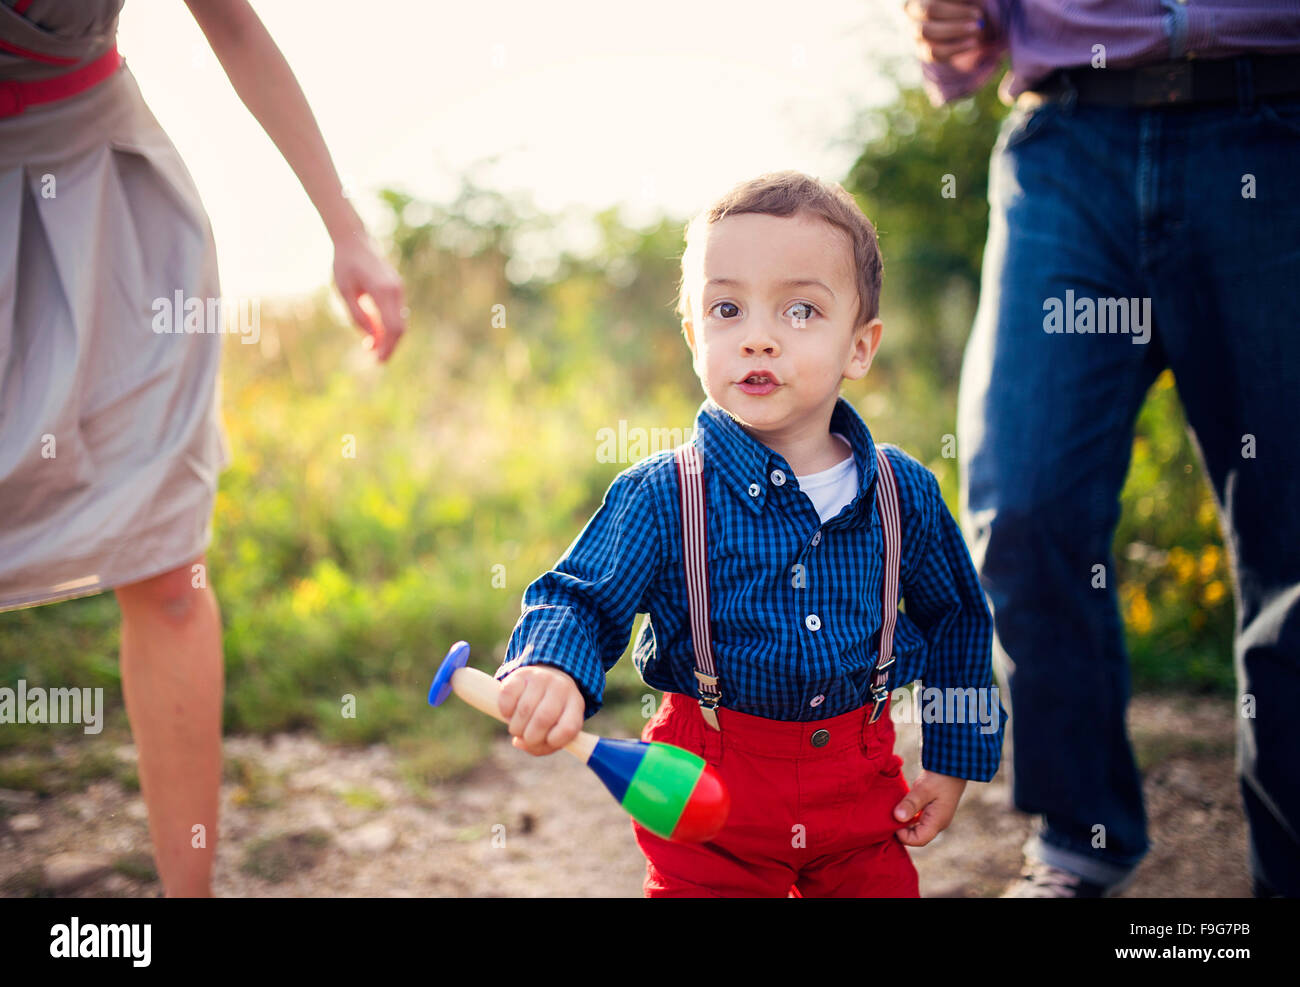 Happy young family having fun outside in summer nature Stock Photo